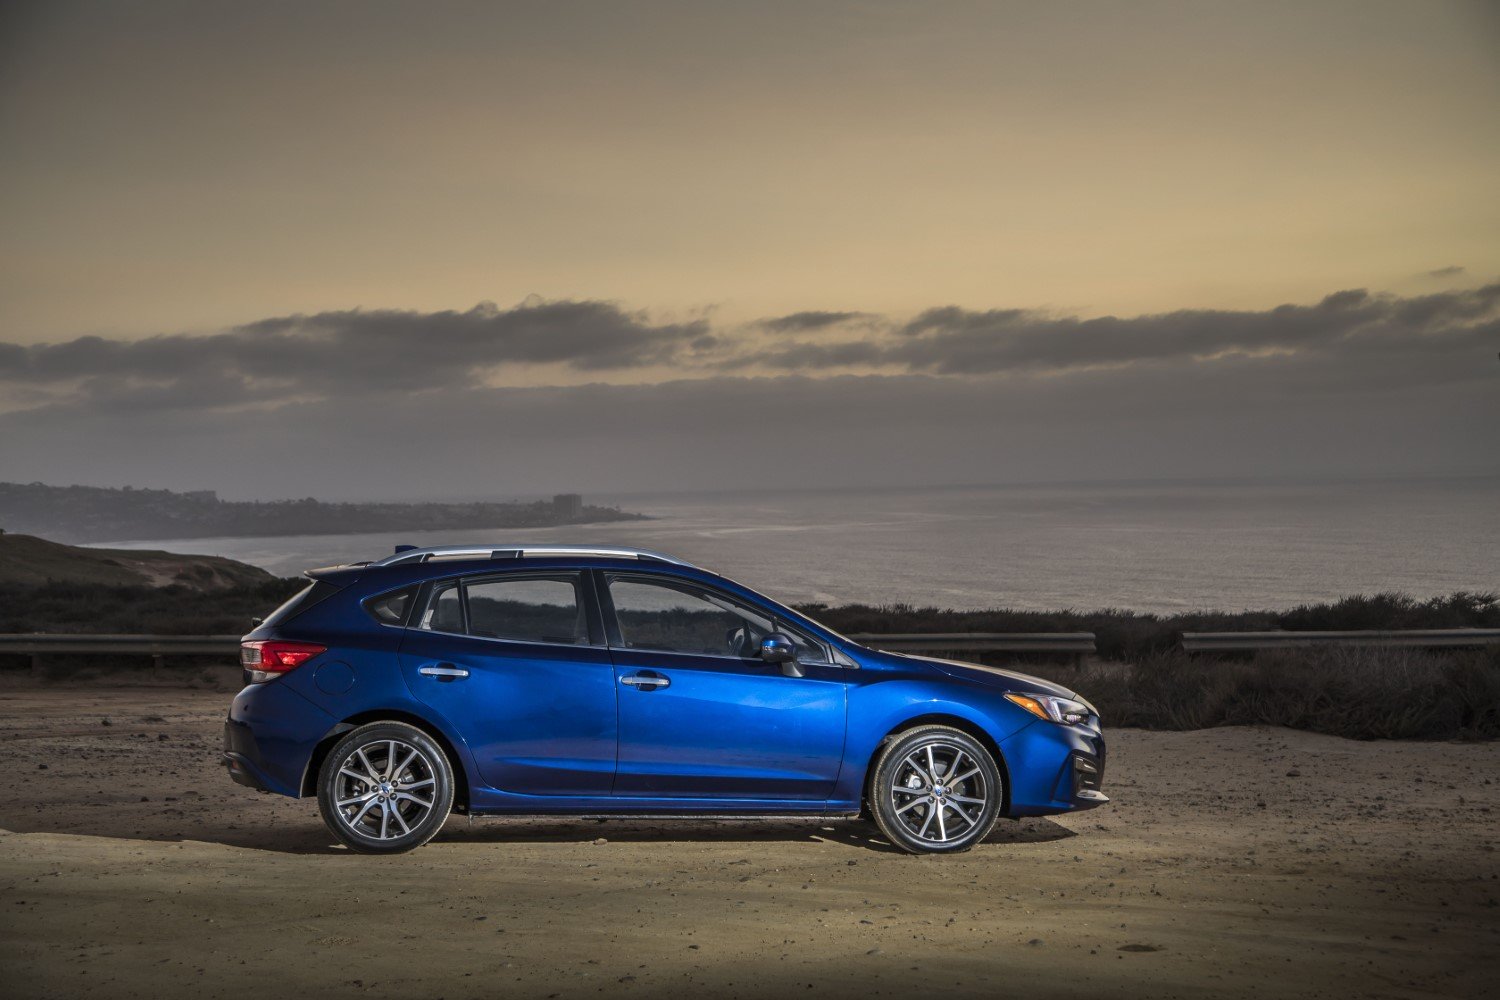 2017 Subaru Impreza Hatchback Specs, Review, and Pricing | CarSession